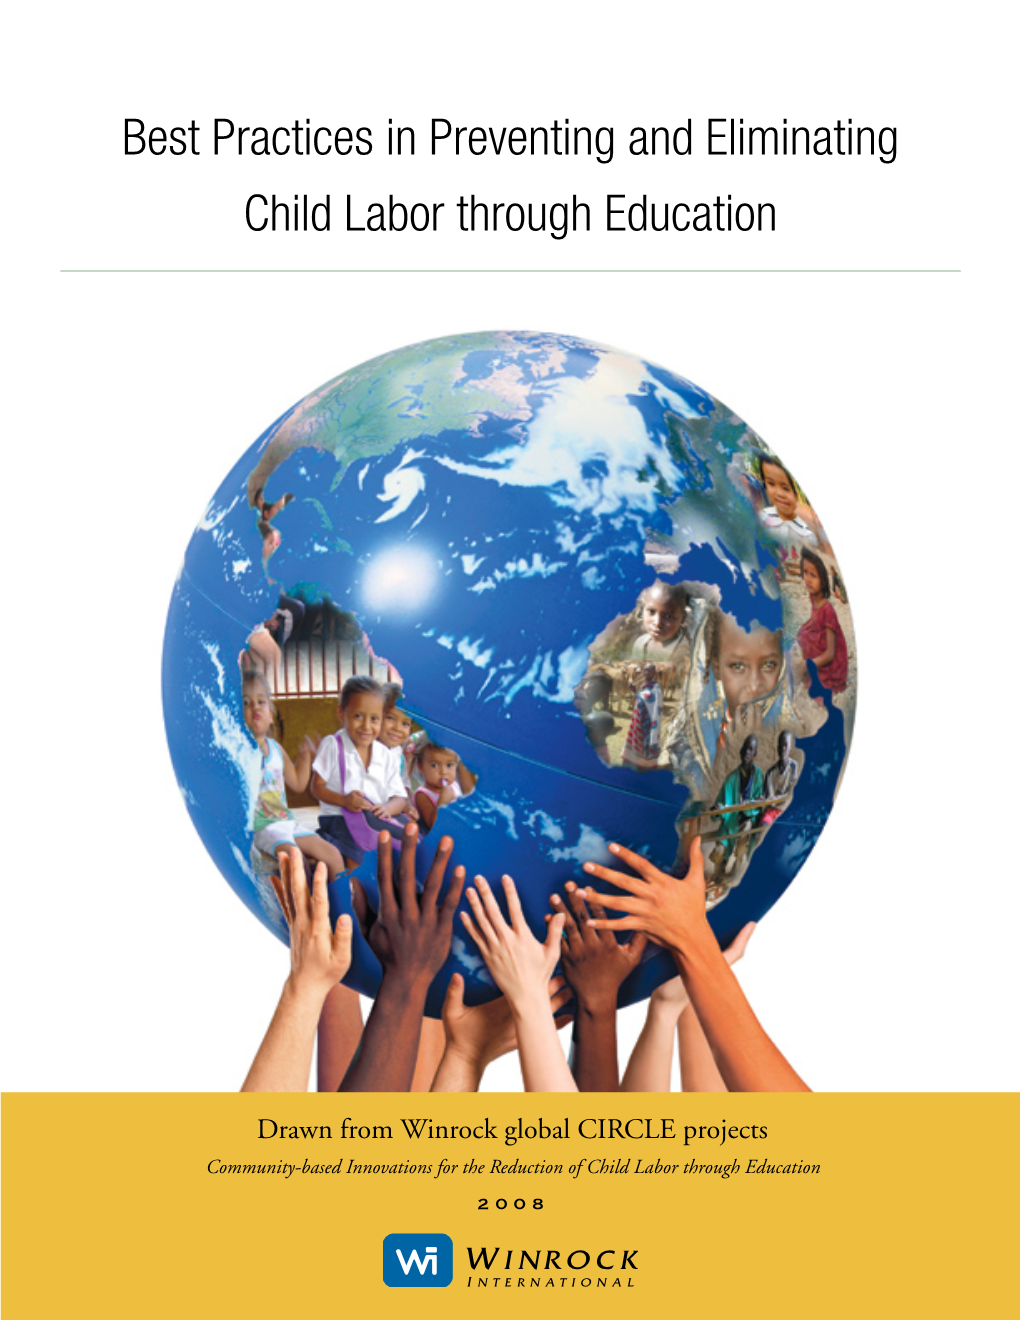 Best Practices in Preventing and Eliminating Child Labor Through Education